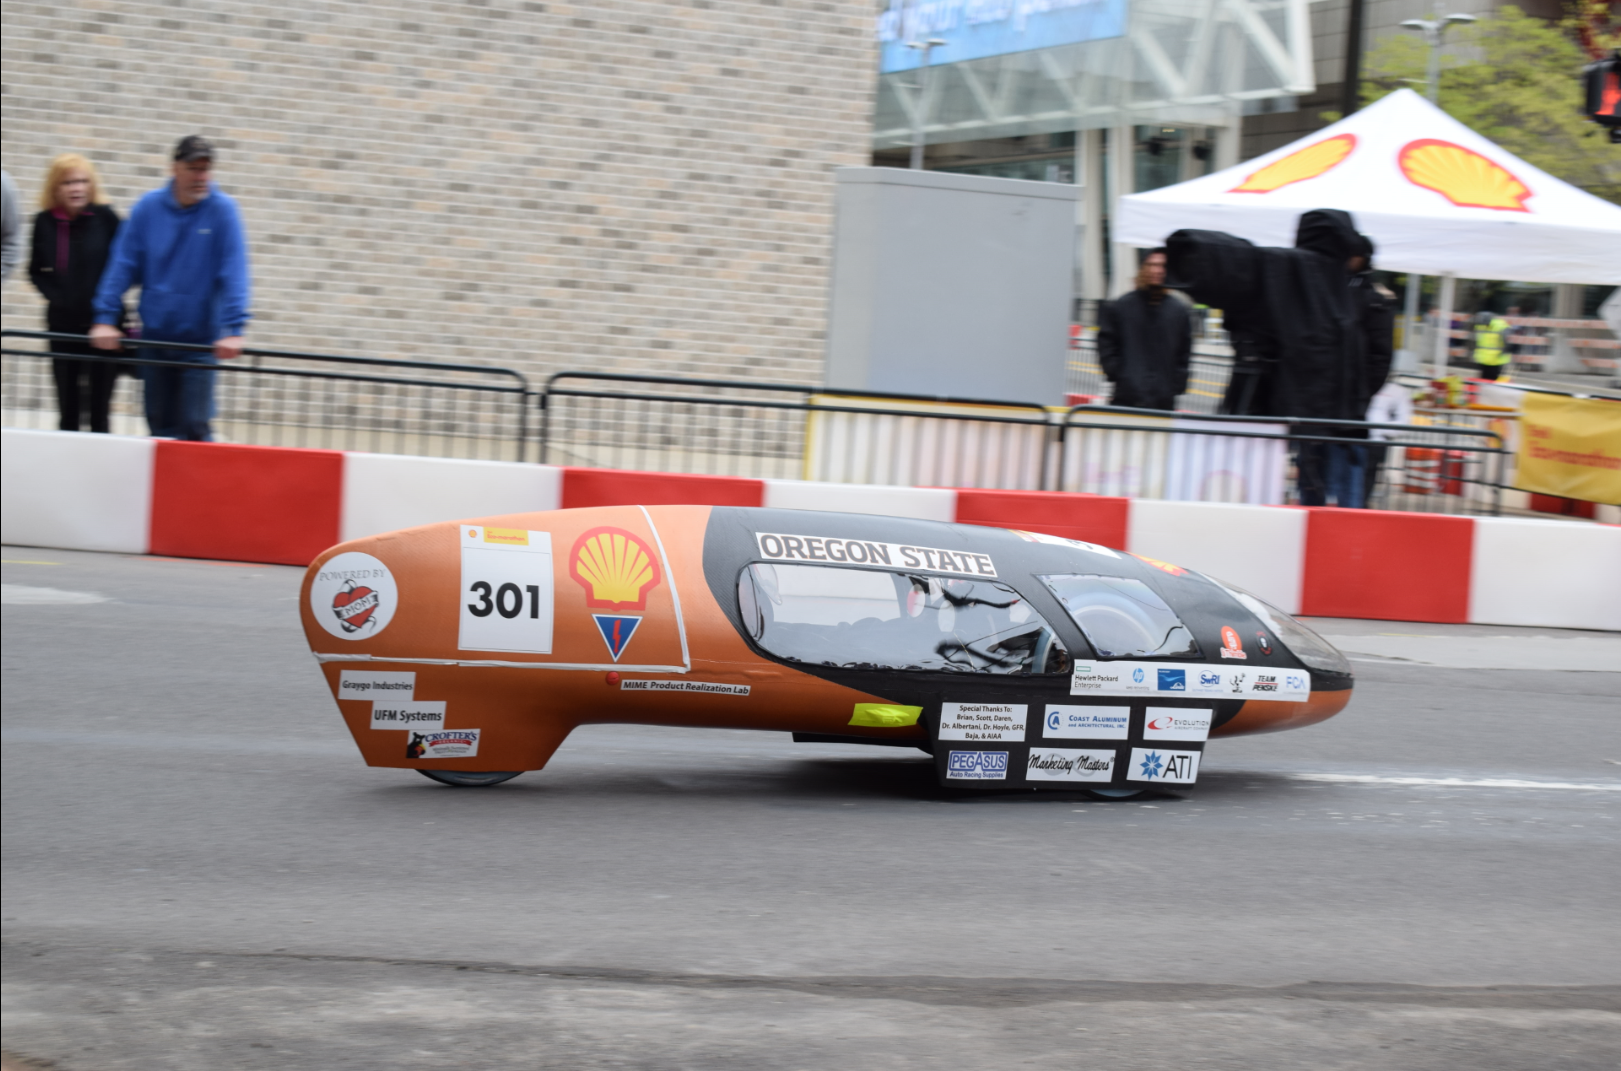 A further refined version of the battery-powered Beaver Bolt, seen here in 2018, will return to the Shell Eco-marathon competition for ultra-high efficiency vehicles. CREDIT: OSU/SHELL ECO- MARATHON